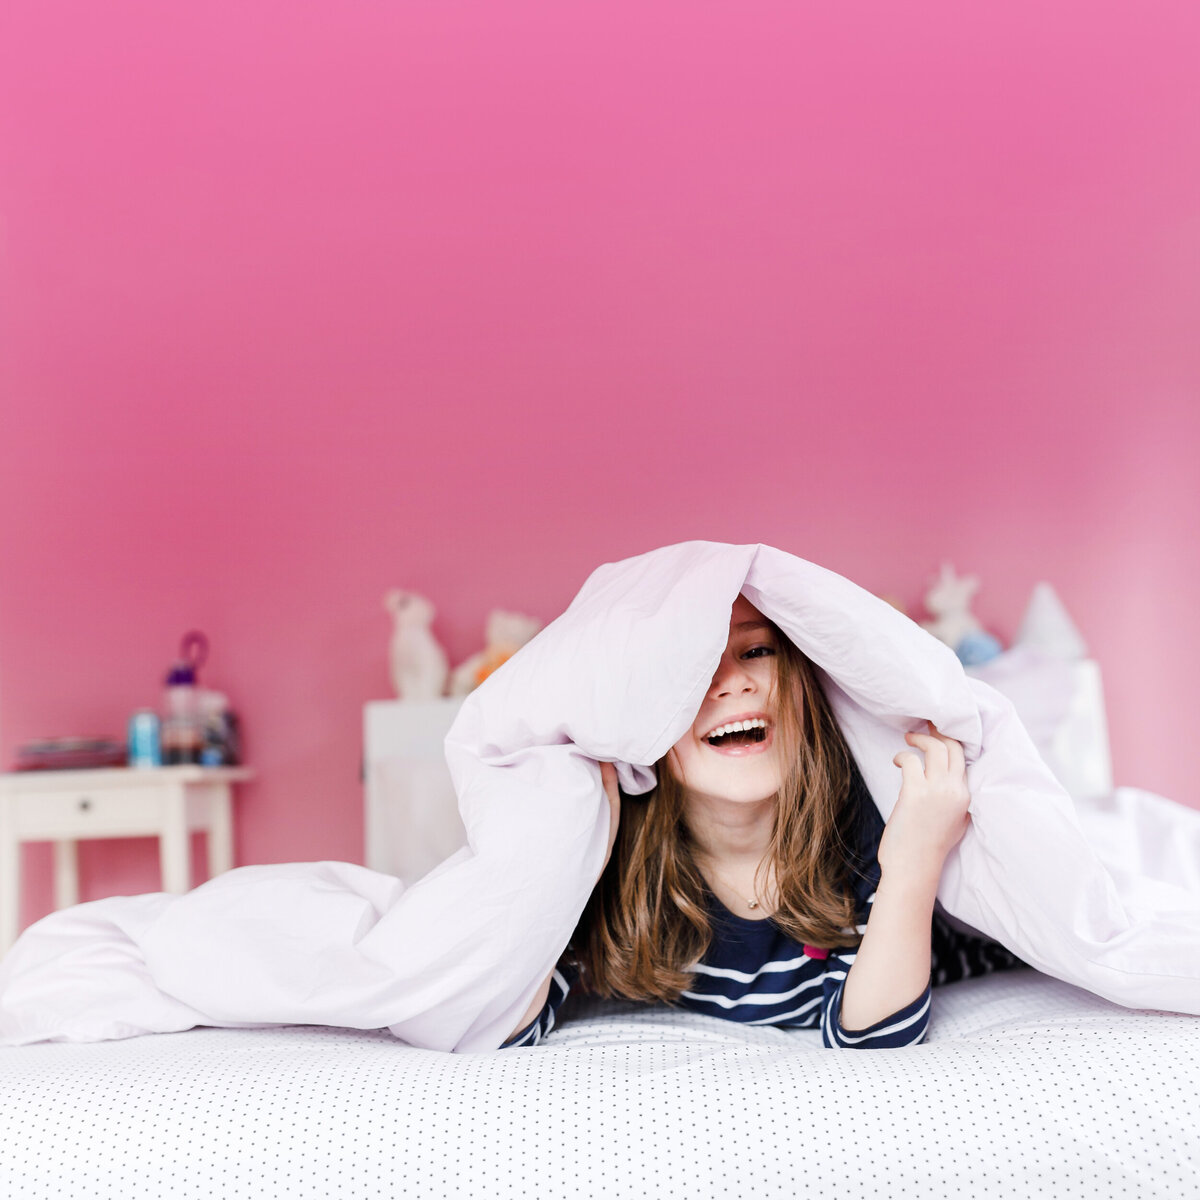 chicago-lifestyle-family-photographer-candid-playful-laugh-girl-smile-pink-bedroom